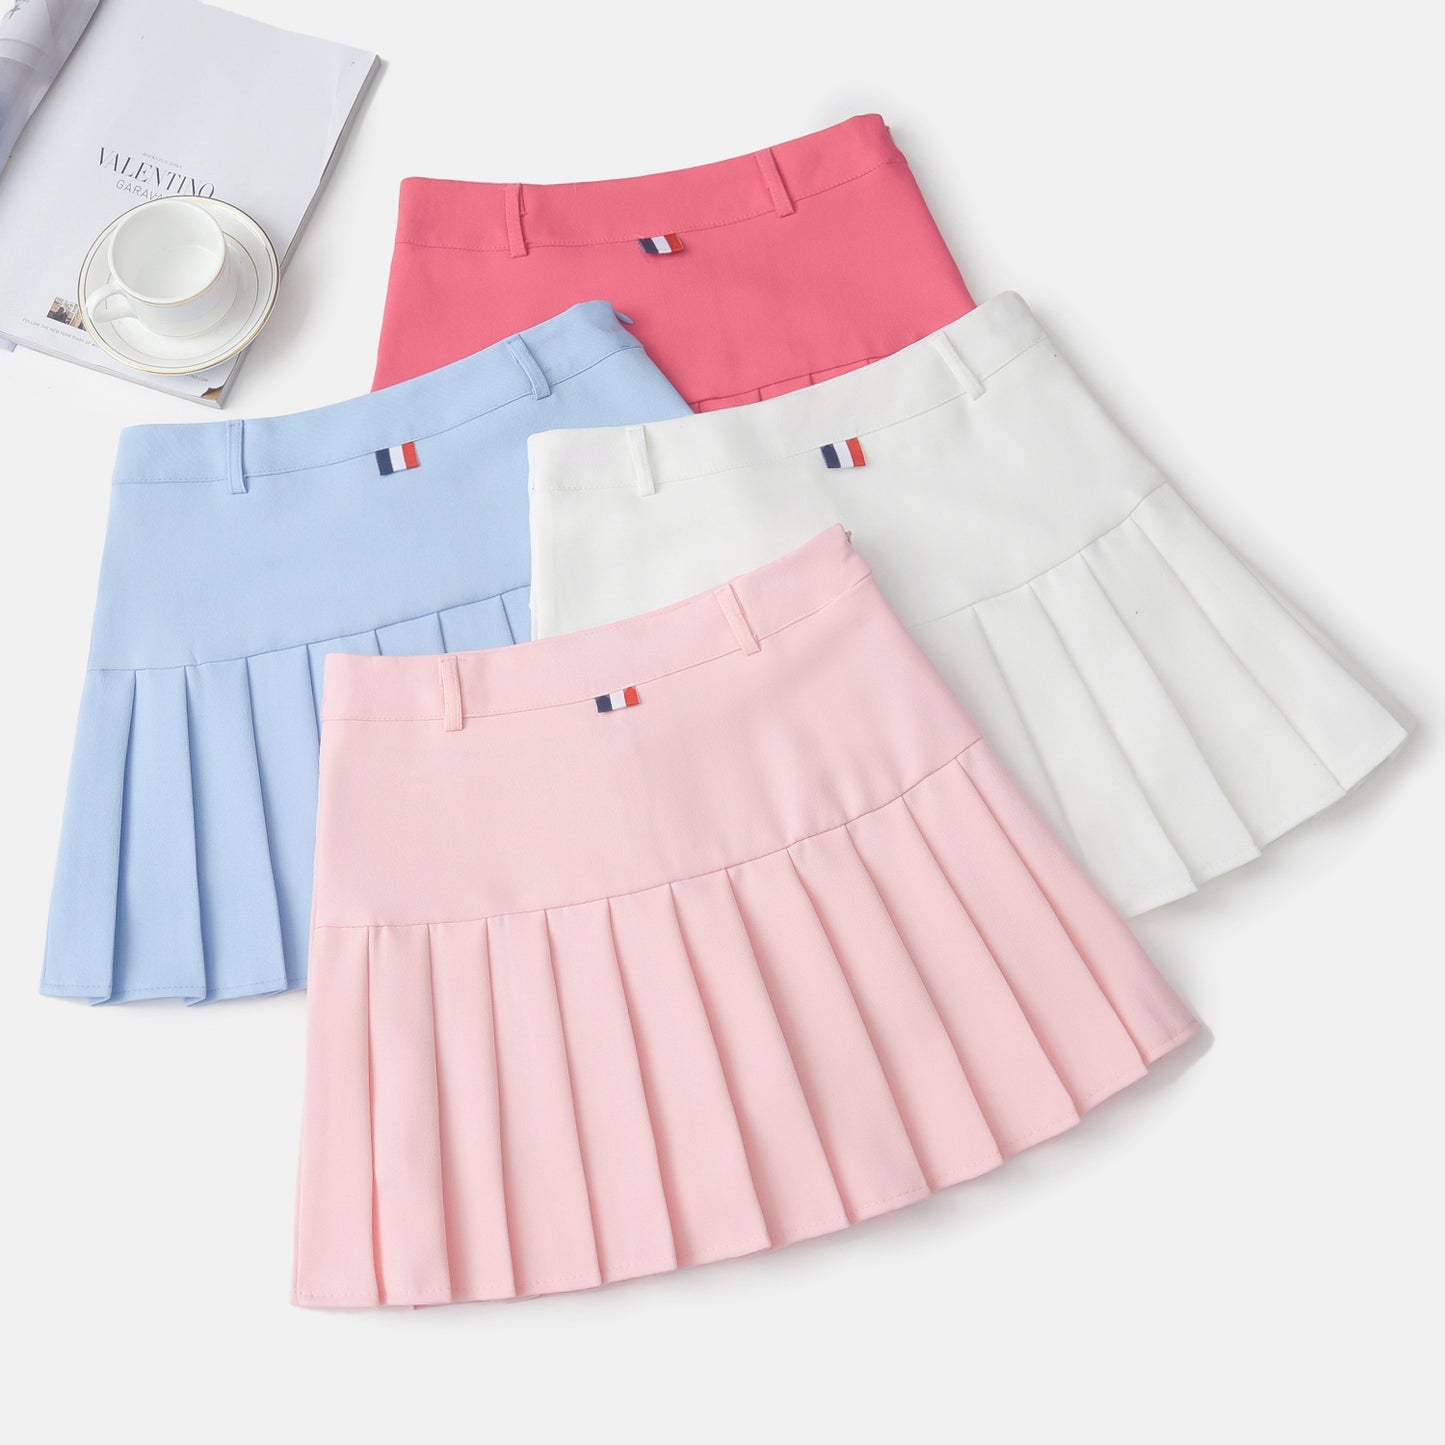 Candy-colored girly skirt A30922